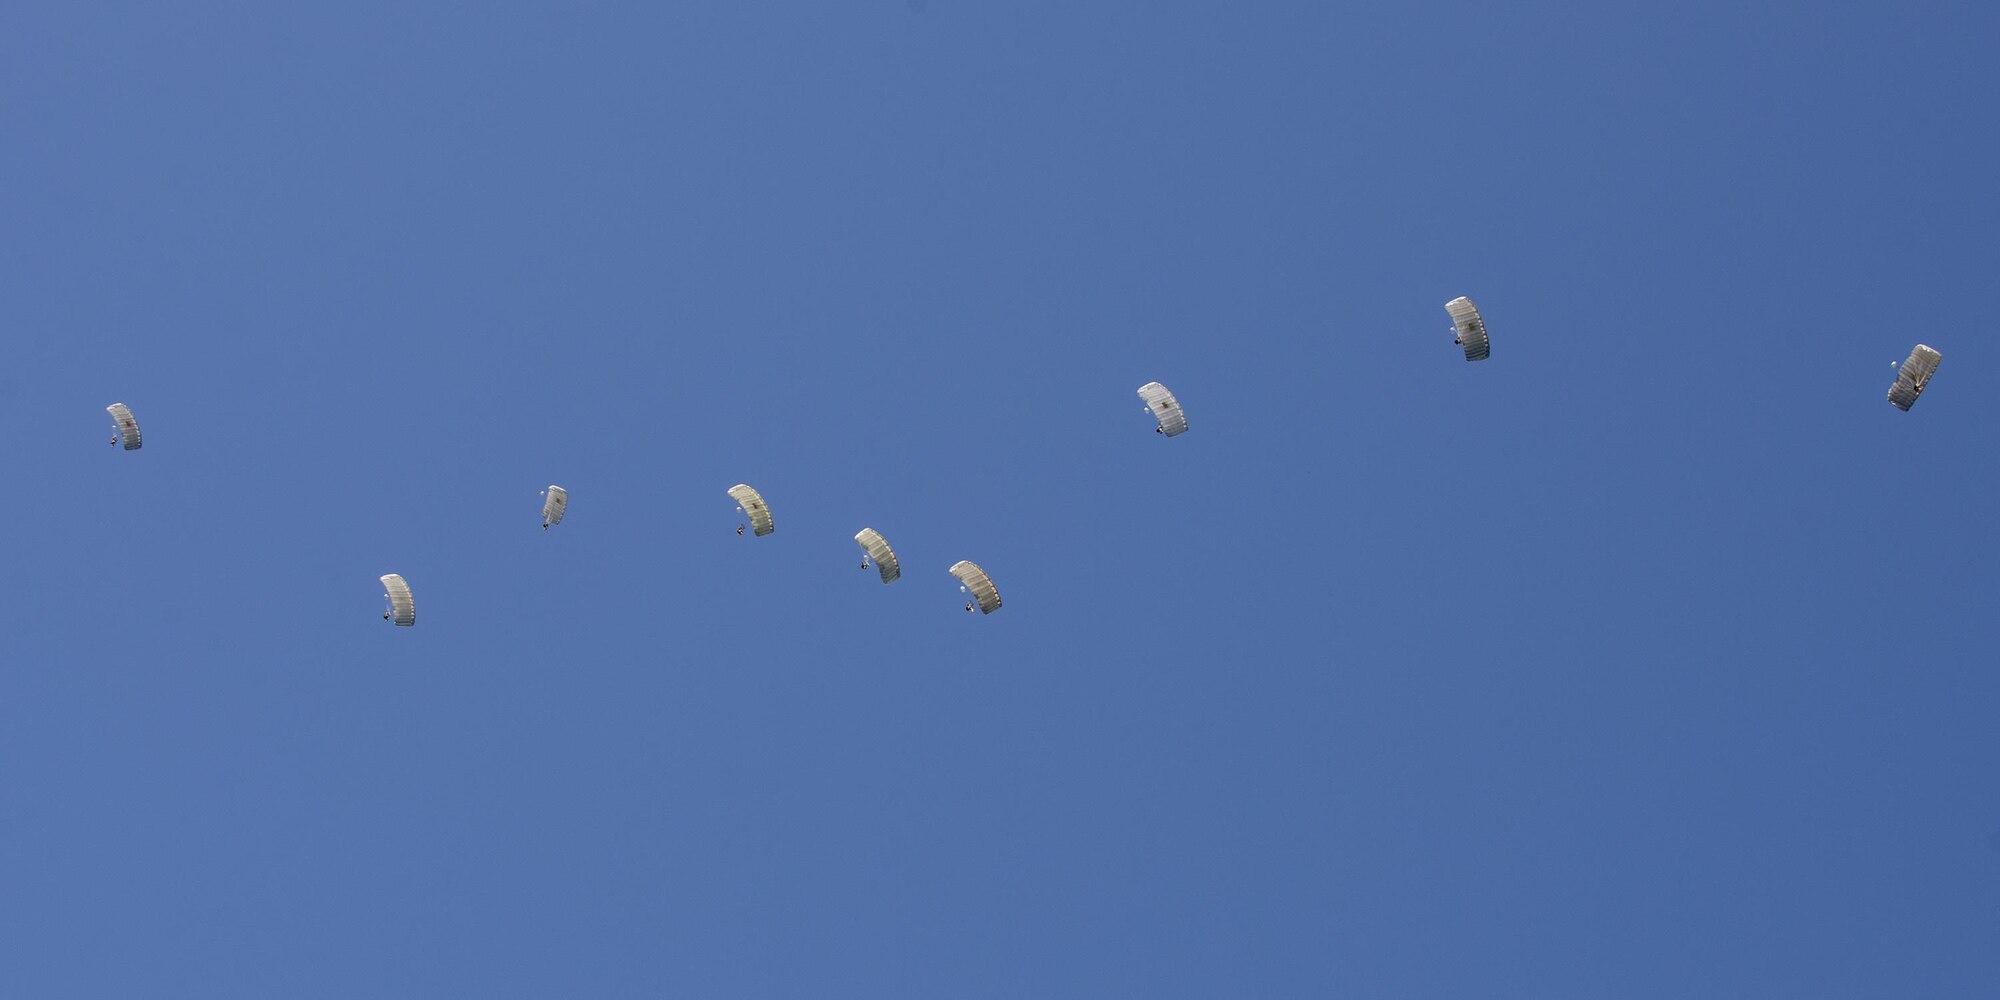 Pararescuemen from the 38th Rescue Squadron drift through the sky during a high-altitude, low-opening jump, Aug. 18, 2016, at Moody Air Force Base, Ga. Training jumps are typically conducted from 9,000 to 12,000 feet, but current deployed operations require an airdrop of 20,000 feet or more. (U.S. Air Force photo by Airman 1st Class Daniel Snider)